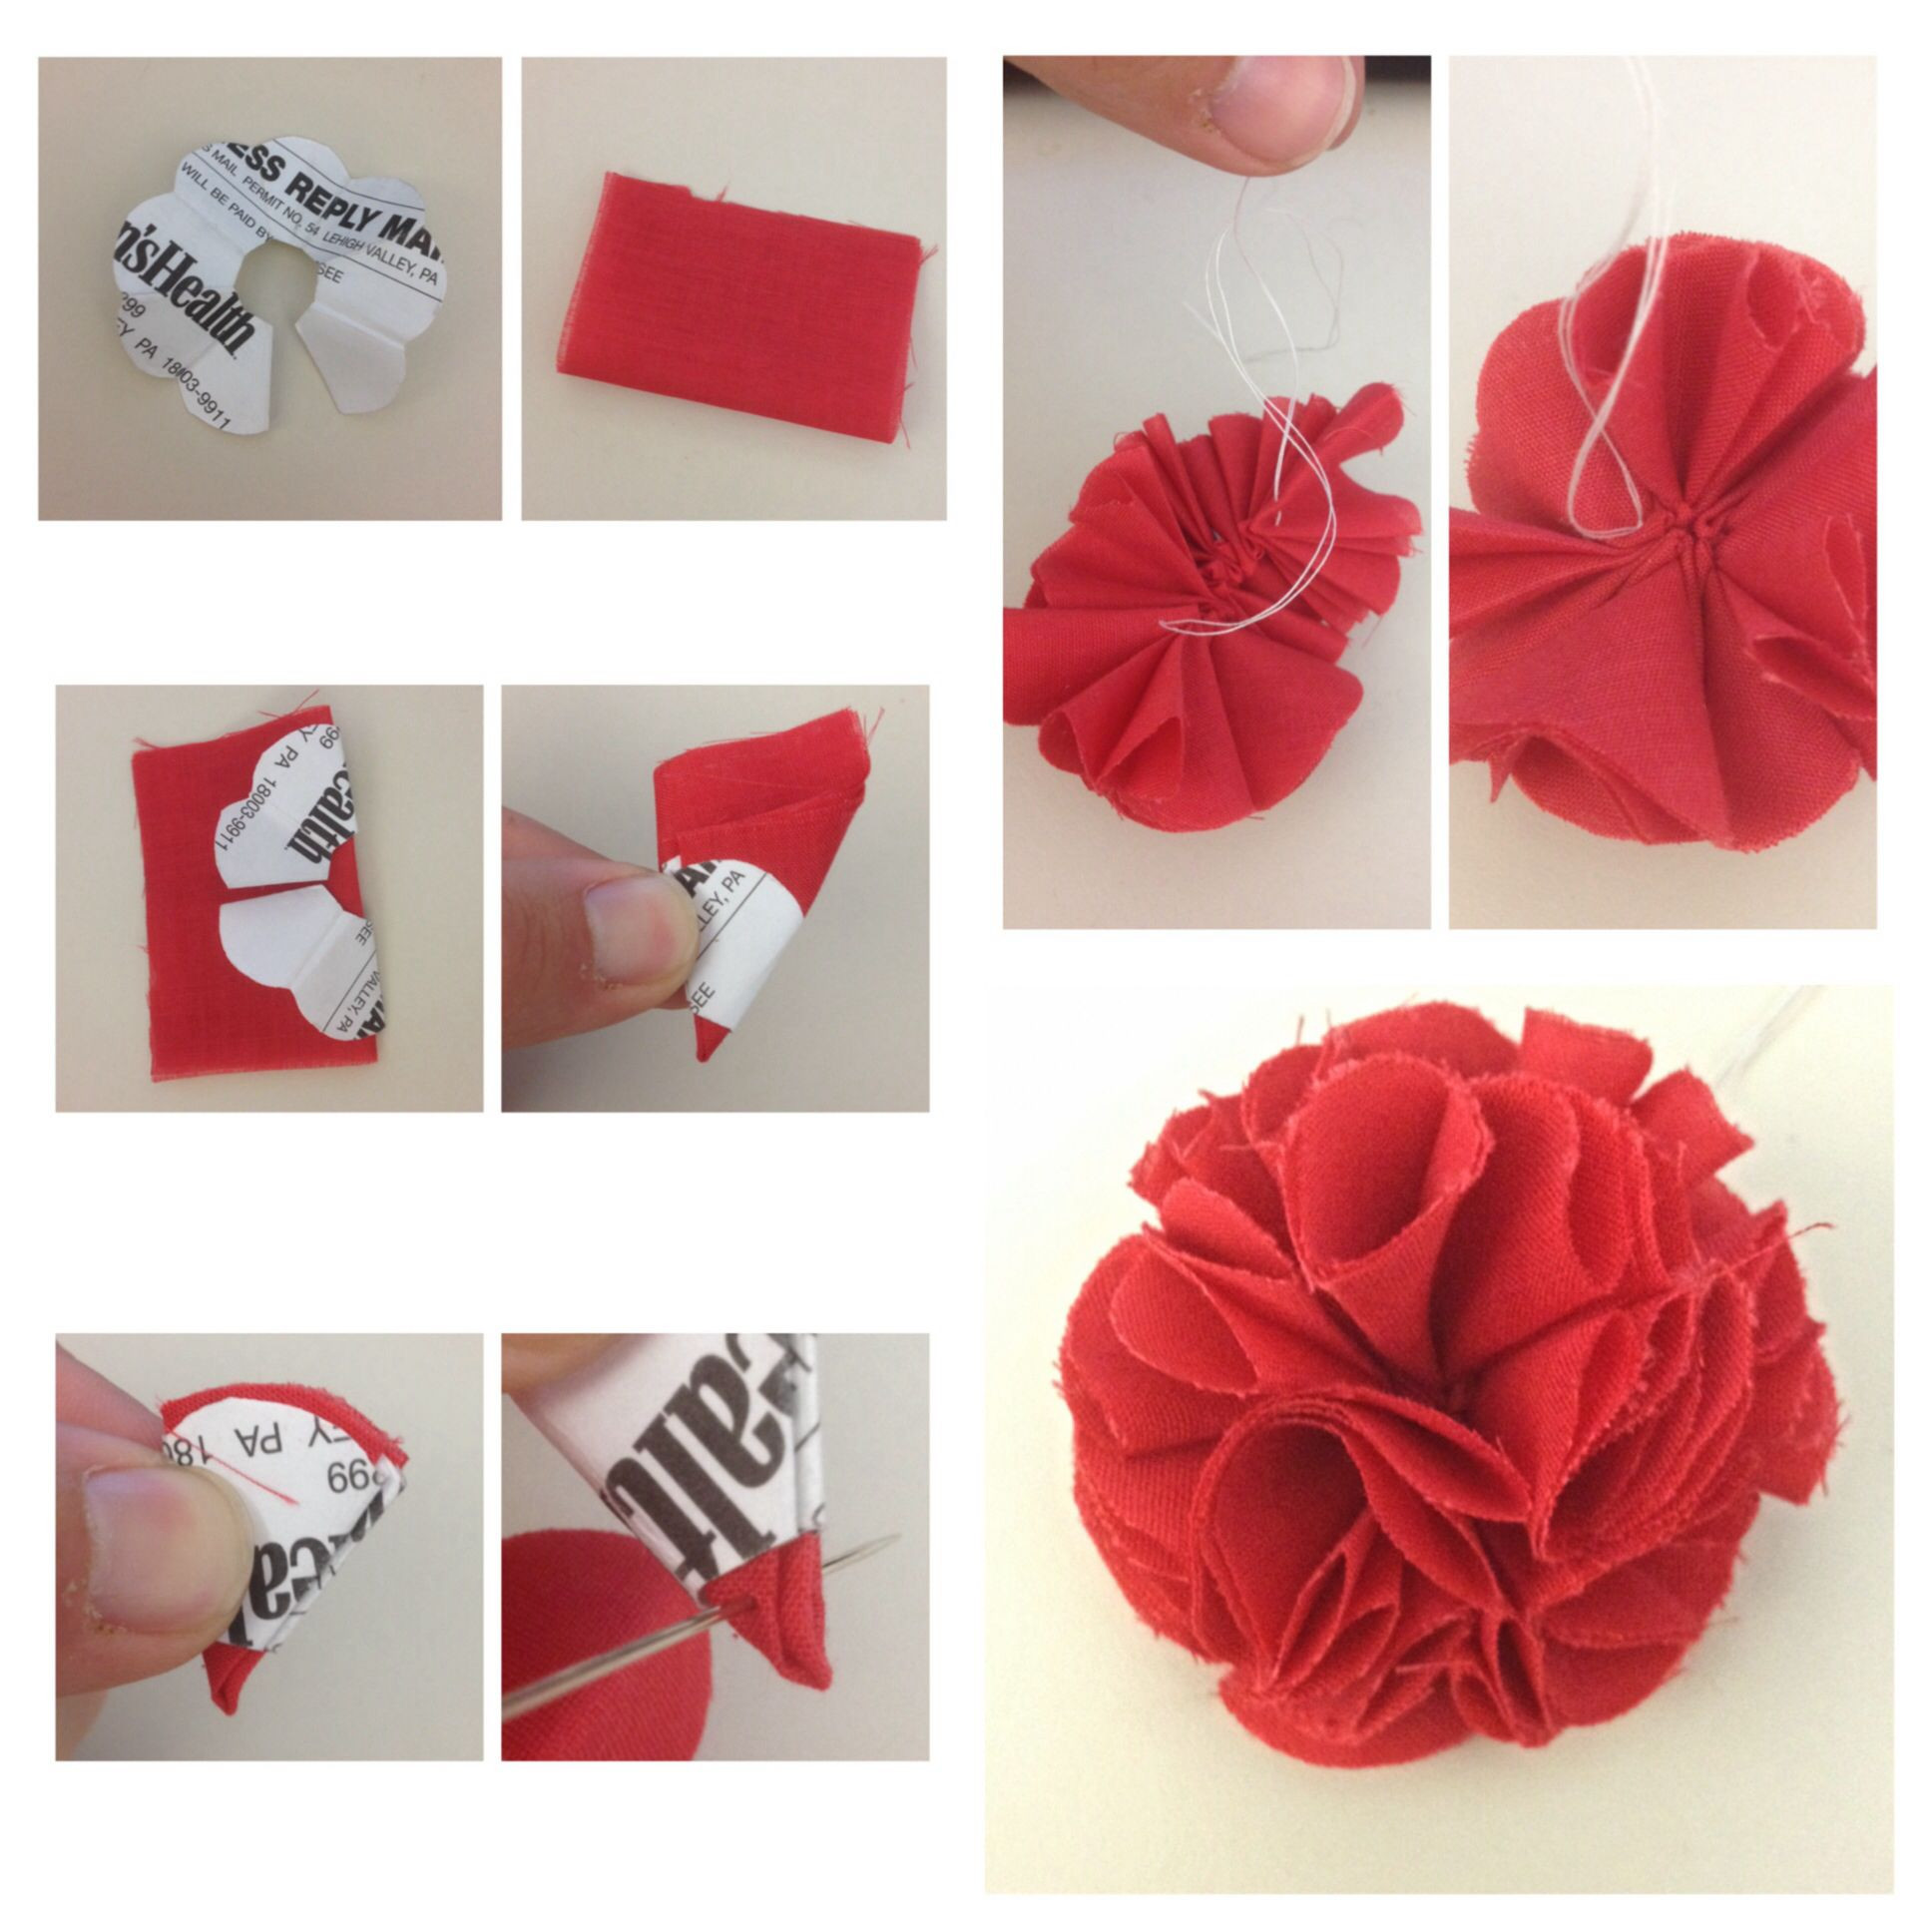 10 Lovable Lapel Pin Vase How to Use 2022 free download lapel pin vase how to use of made this flower lapel pin for my suits placed a small round red within made this flower lapel pin for my suits placed a small round red felt piece